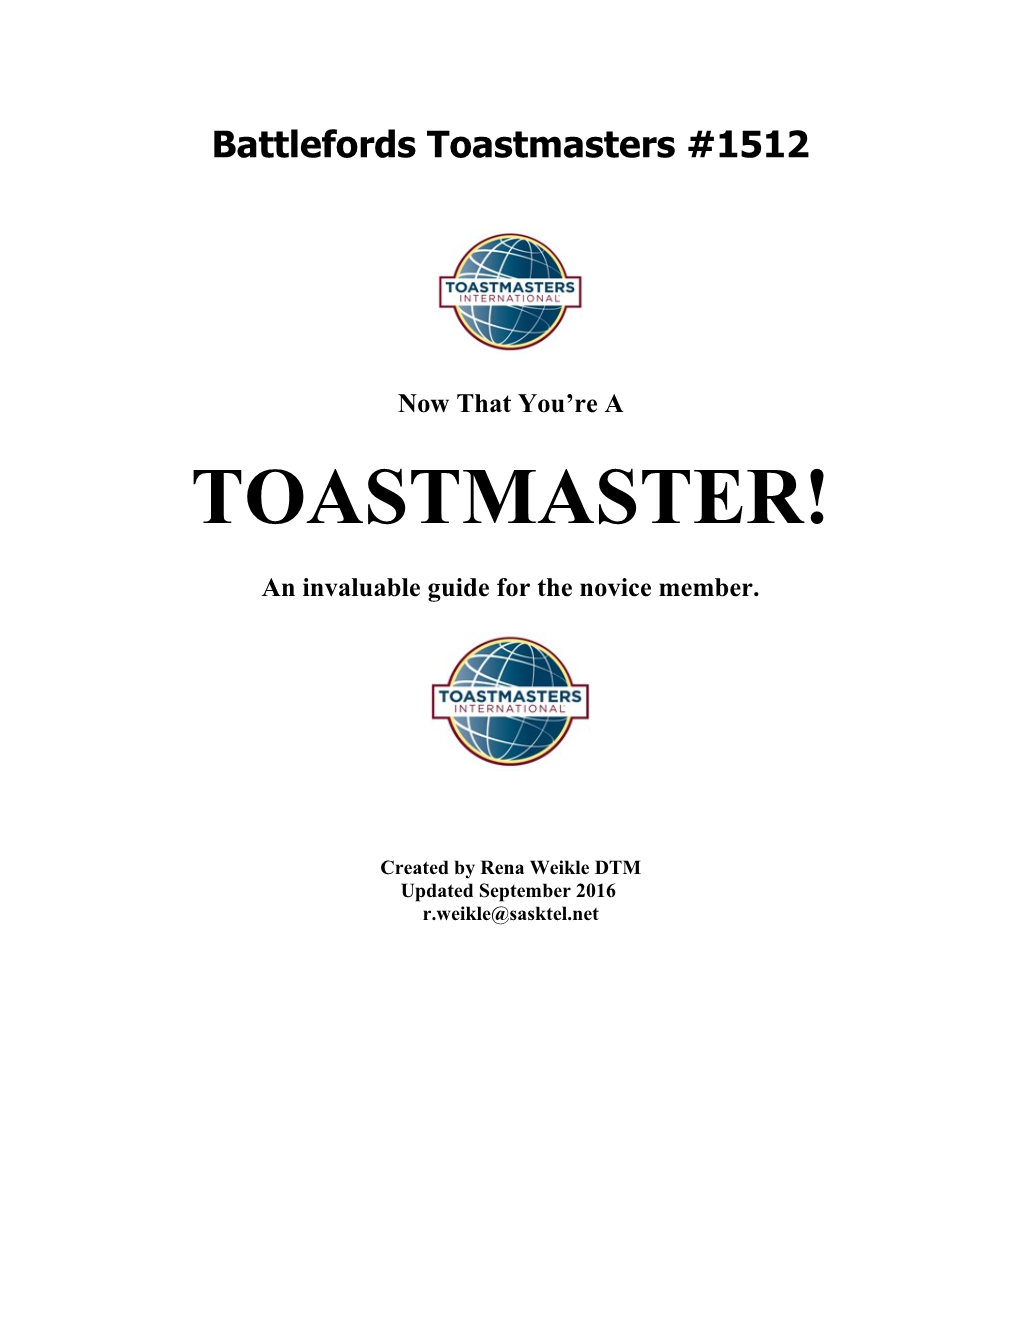 For the New Toastmaster